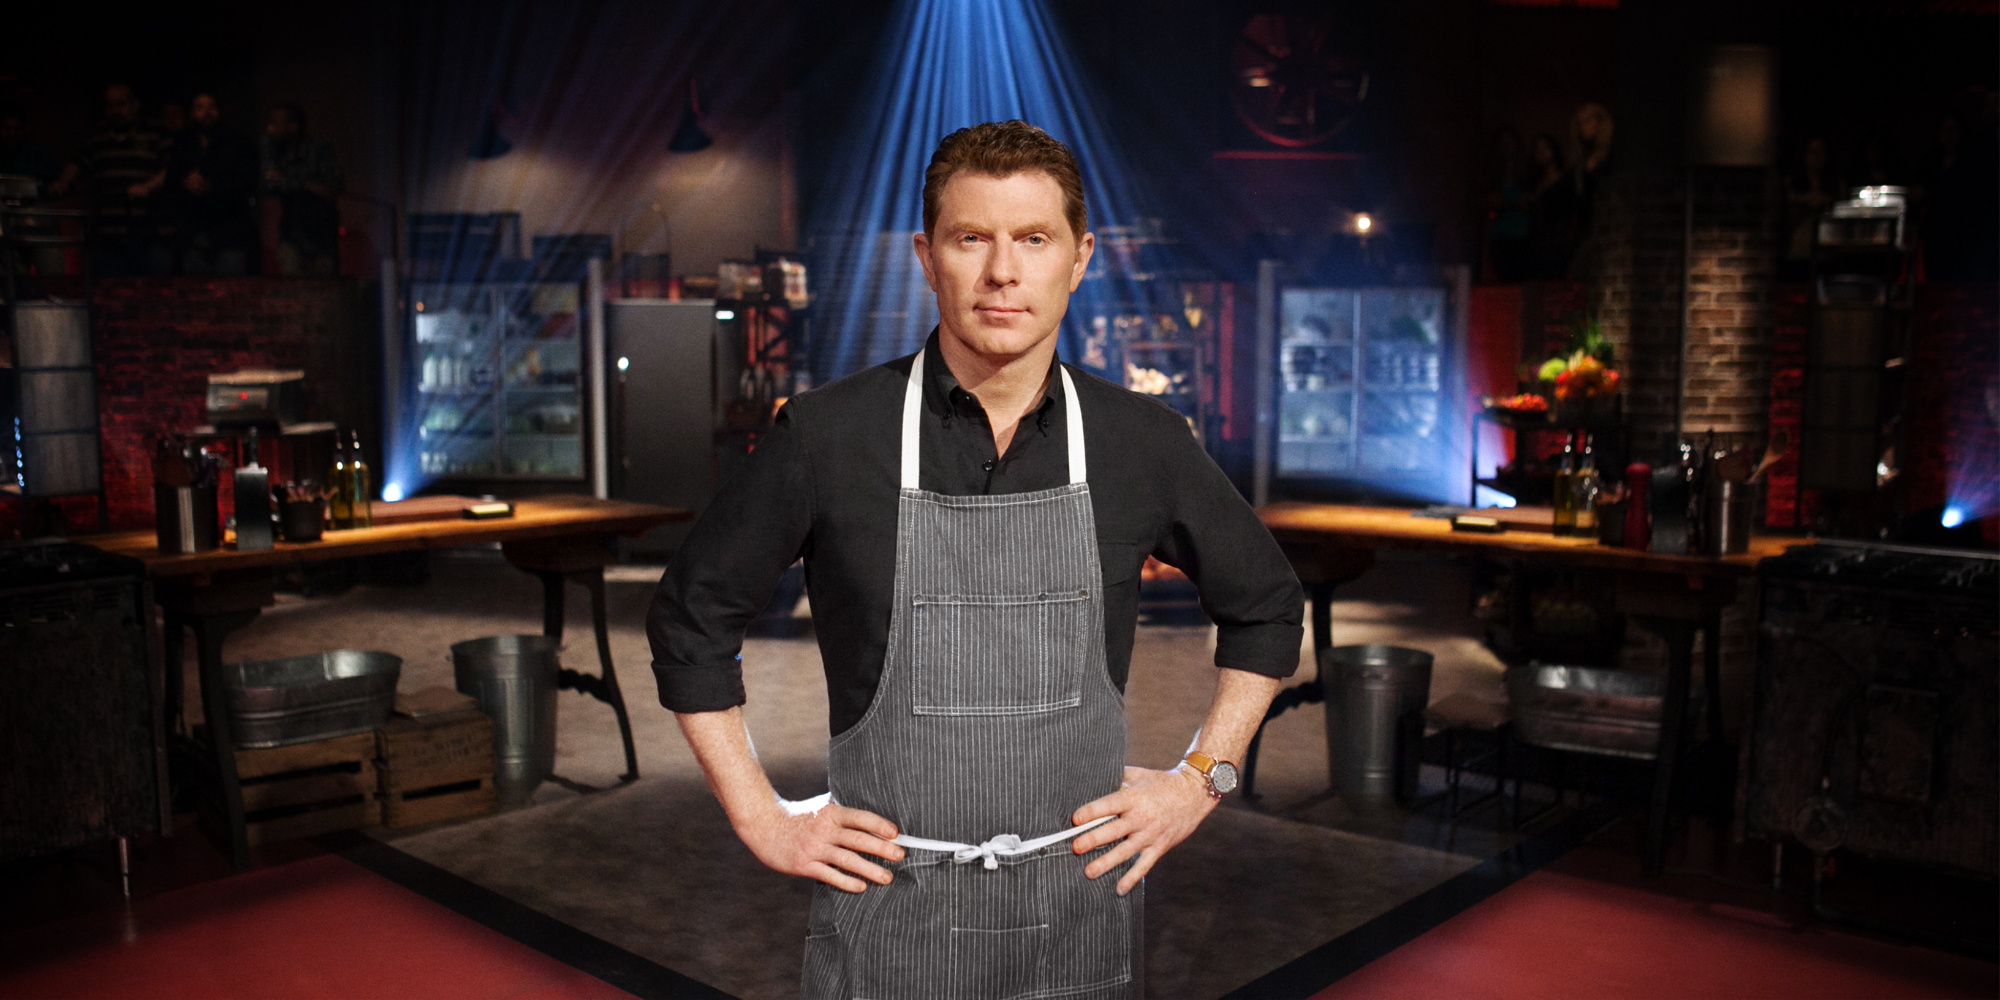 Bobby Flay on the set of 'Beat Bobby Flay' on the Food Network.